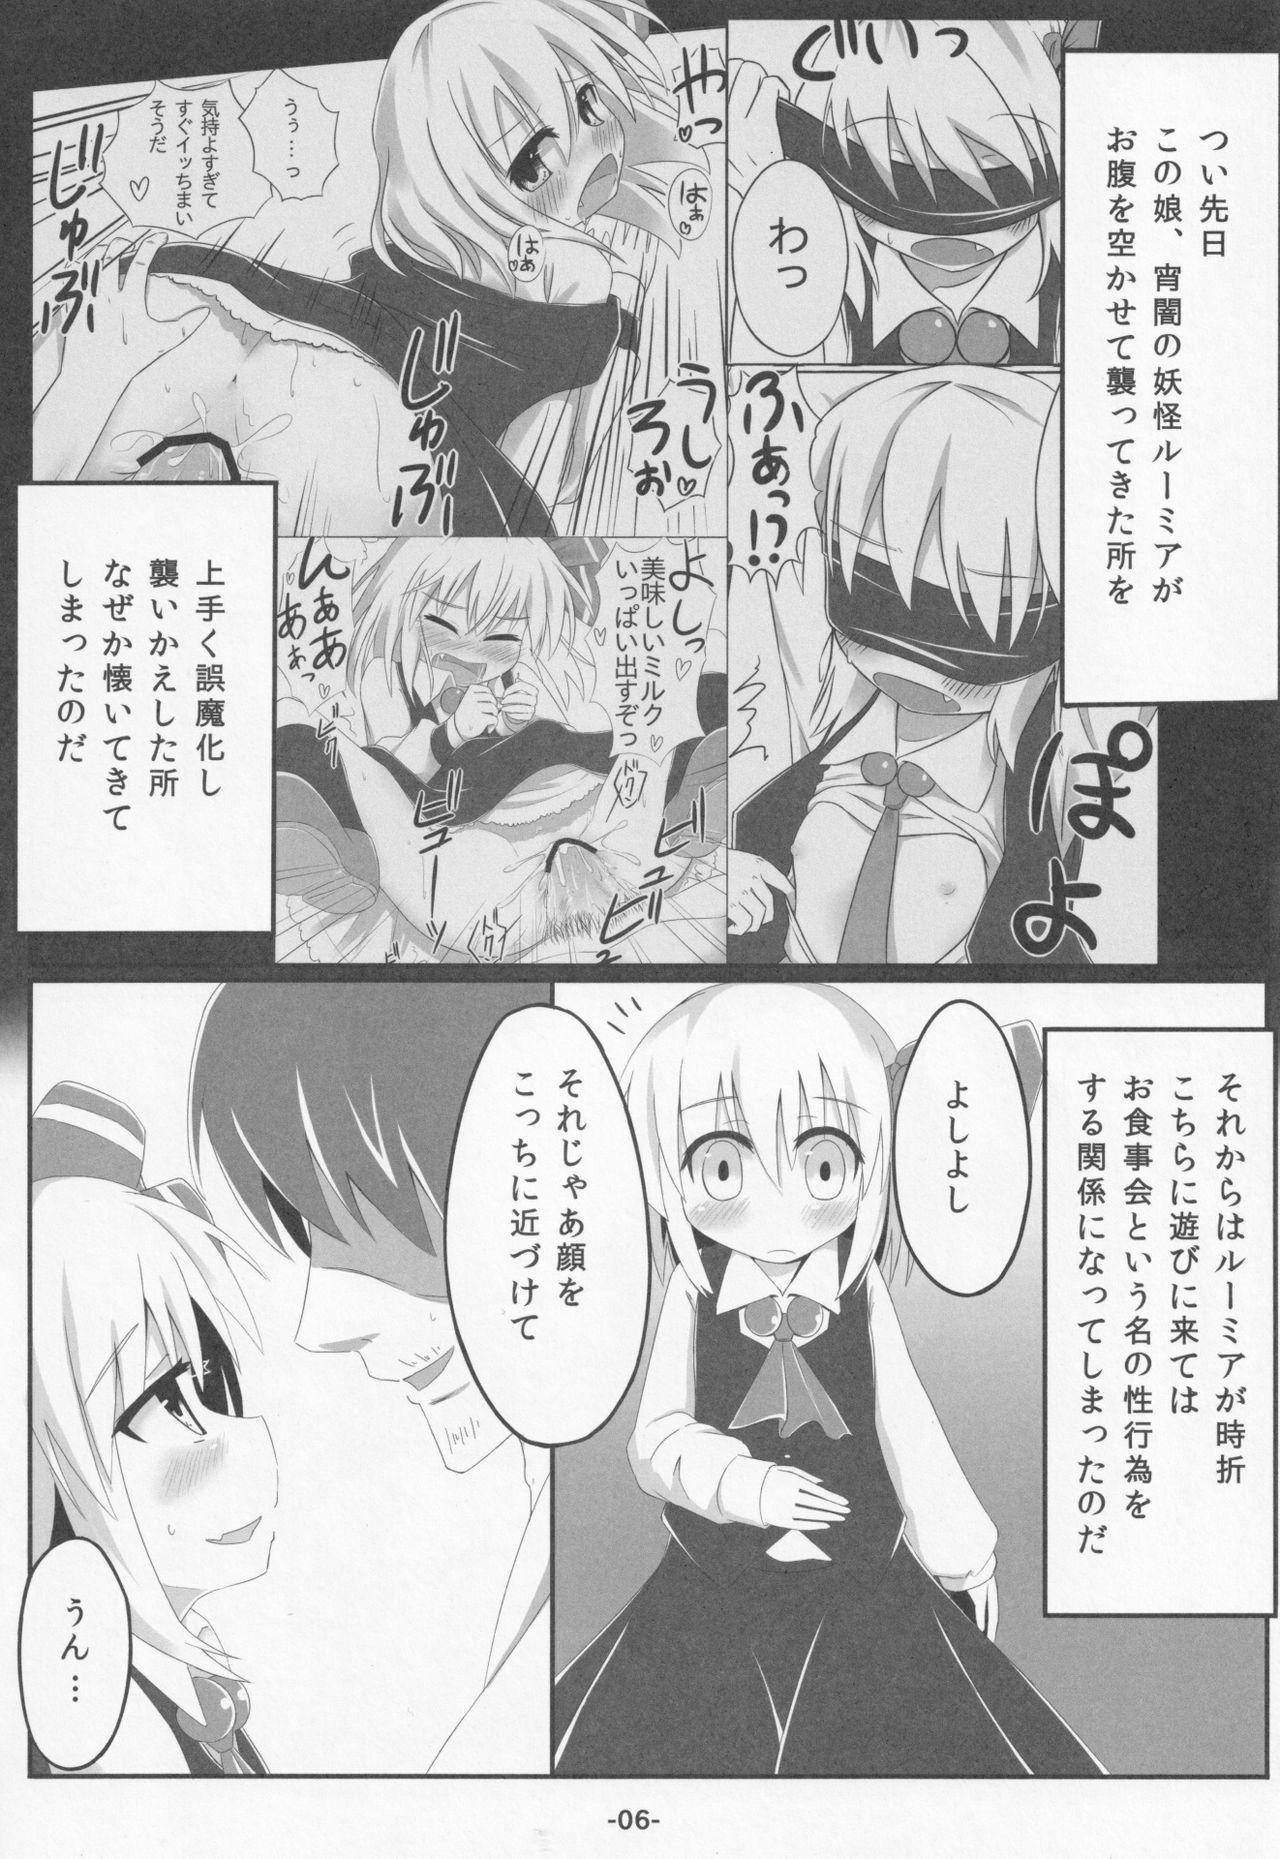 Money blind new days - Touhou project Tight - Page 5